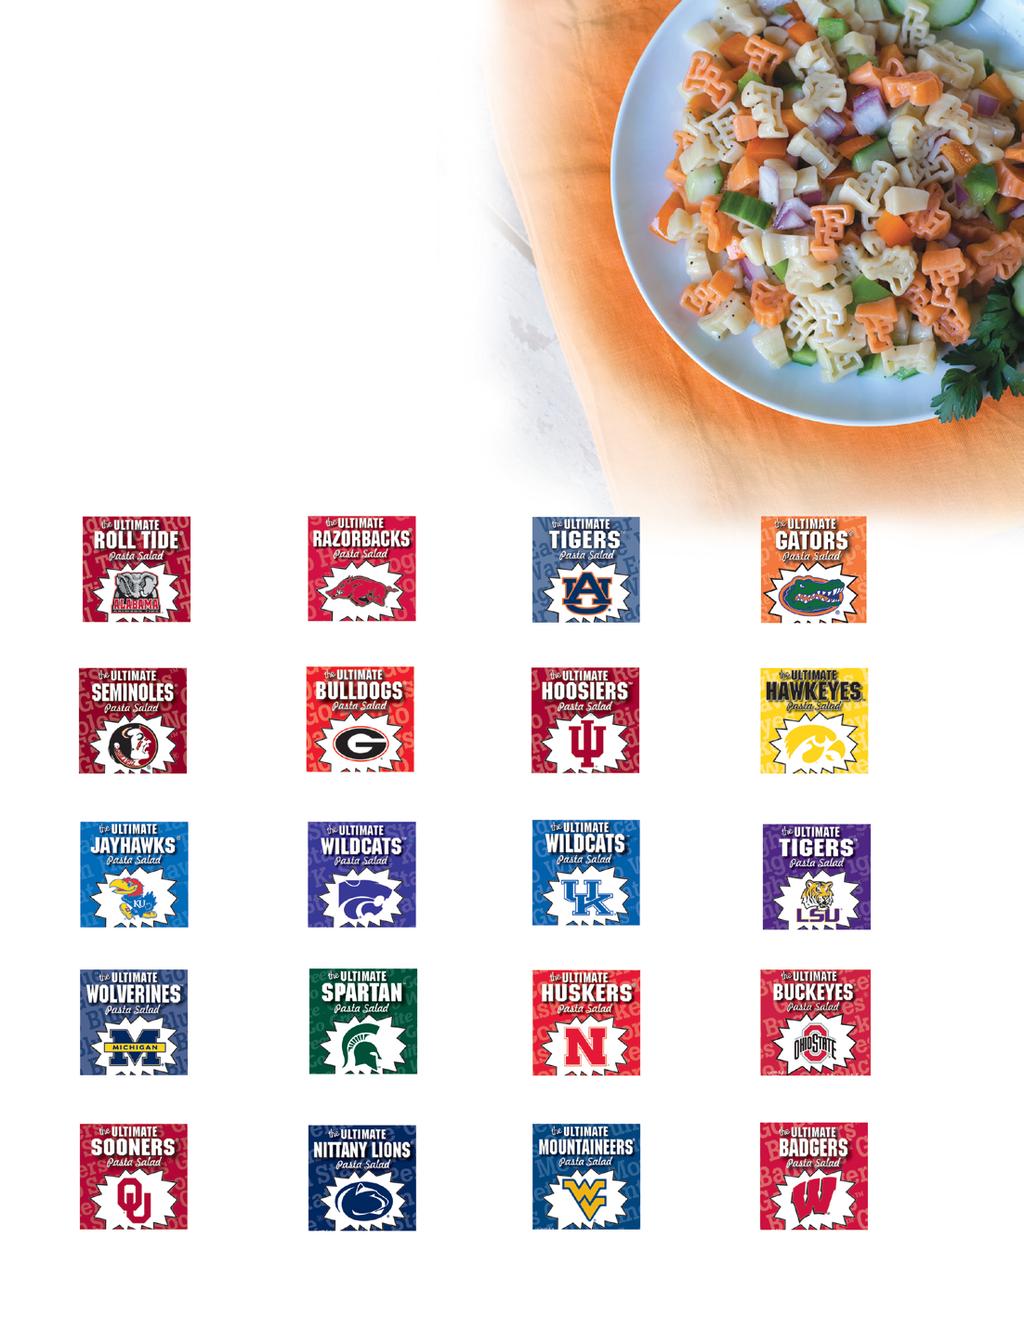 4 CO LLEGIATE Pasta Salads Officially Licensed Delicious Salads for your Tailgate Parties Collegiate Pasta Salads (pasta + mix) D20 - ALABAMA D21 - ARKANSAS D22 - AUBURN D23 -